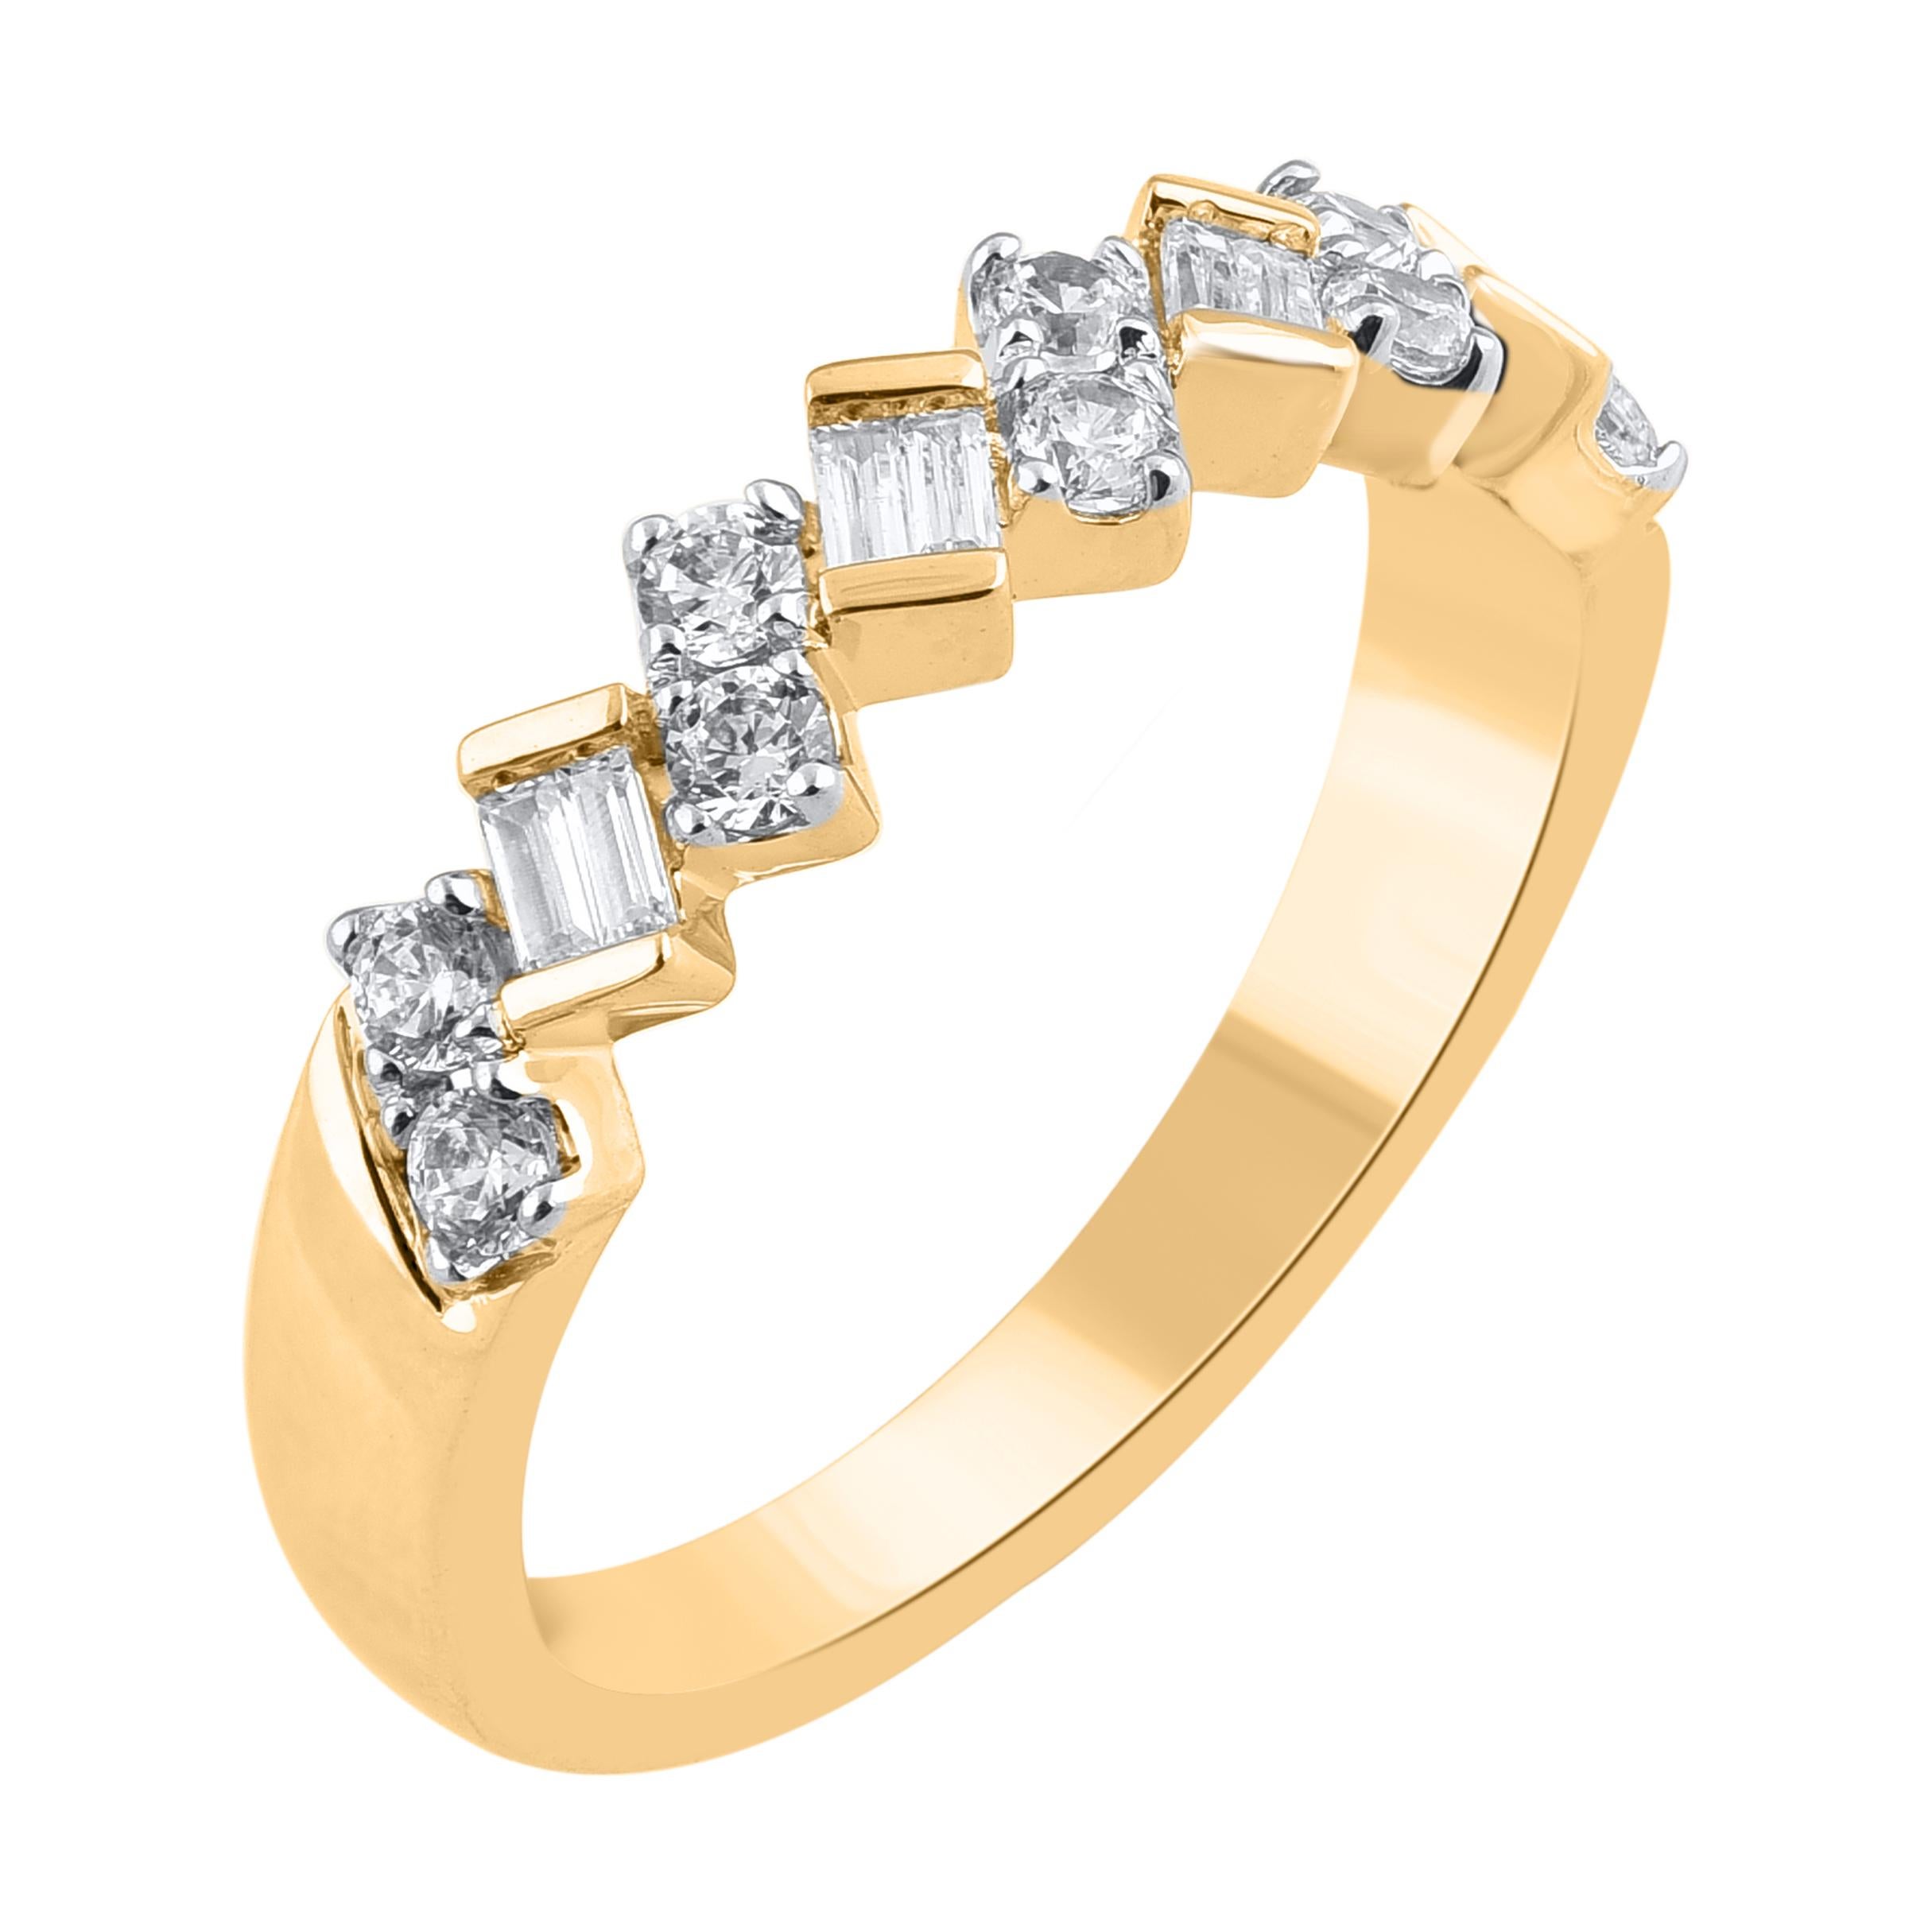 Give a touch of glamour to your fine jewelry collection with this diamond engagement band ring. This beautiful ring features shimmering brilliant cut diamonds and baguette cut diamonds in prong setting. crafted in 14 karat yellow gold. The ring is